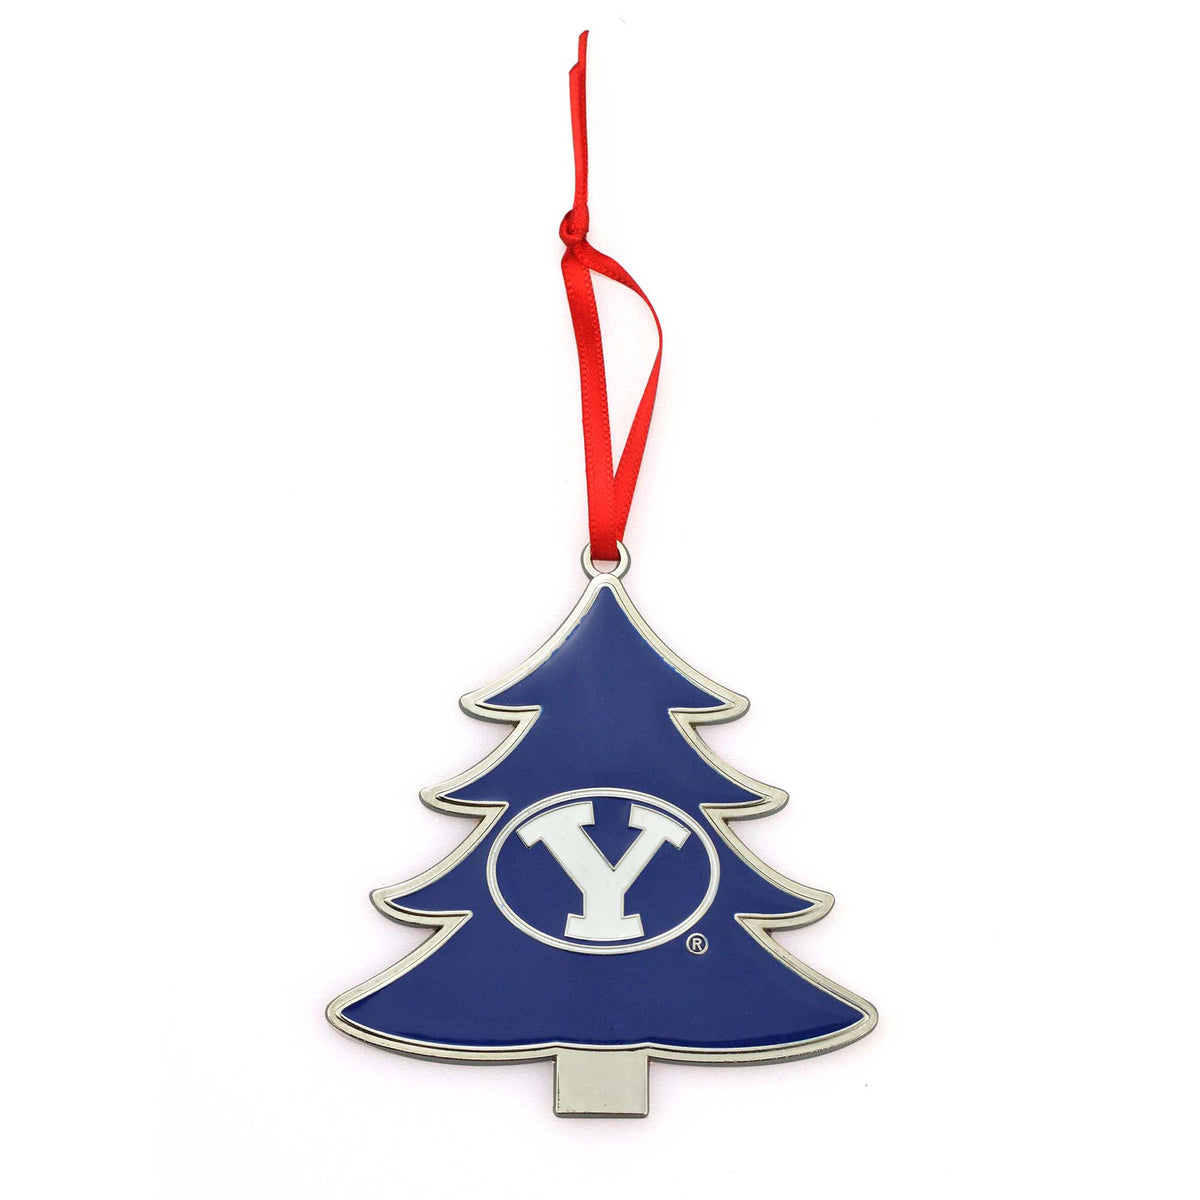 BYU Cougars (Brigham Young University) Tree Shaped Metal Christmas Ornament